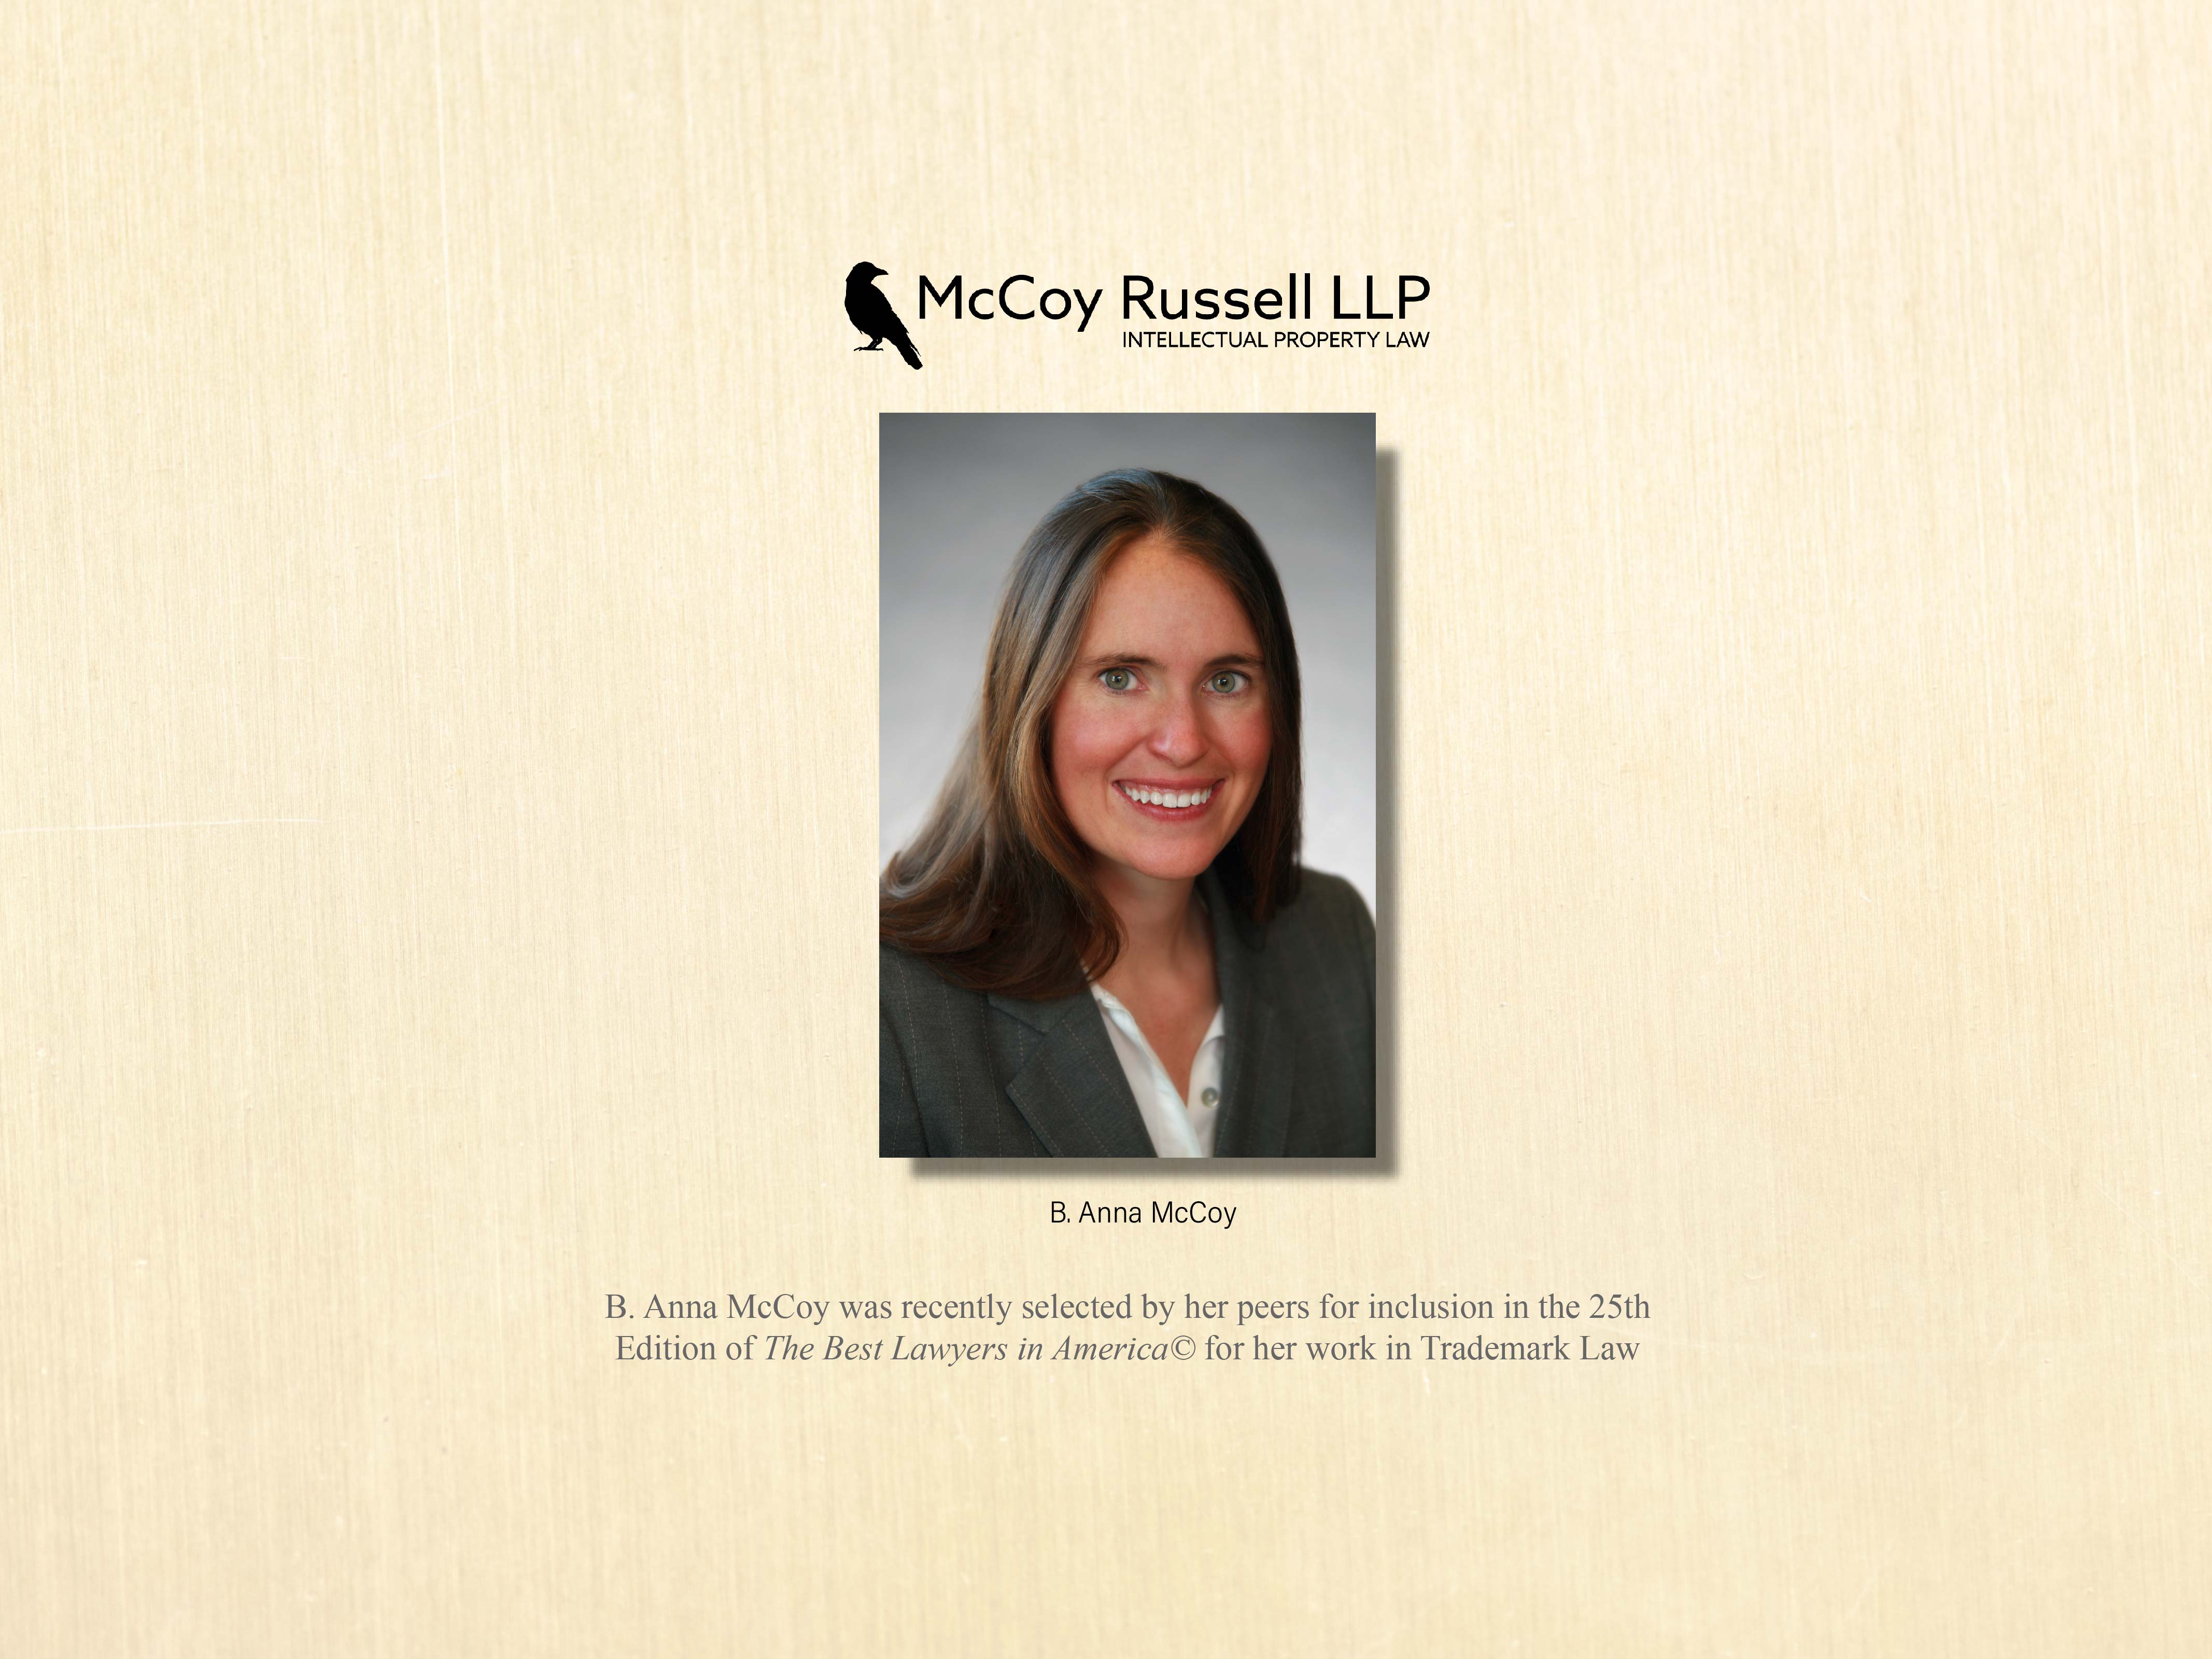 B. Anna McCoy in 2019 Edition of Best Lawyers